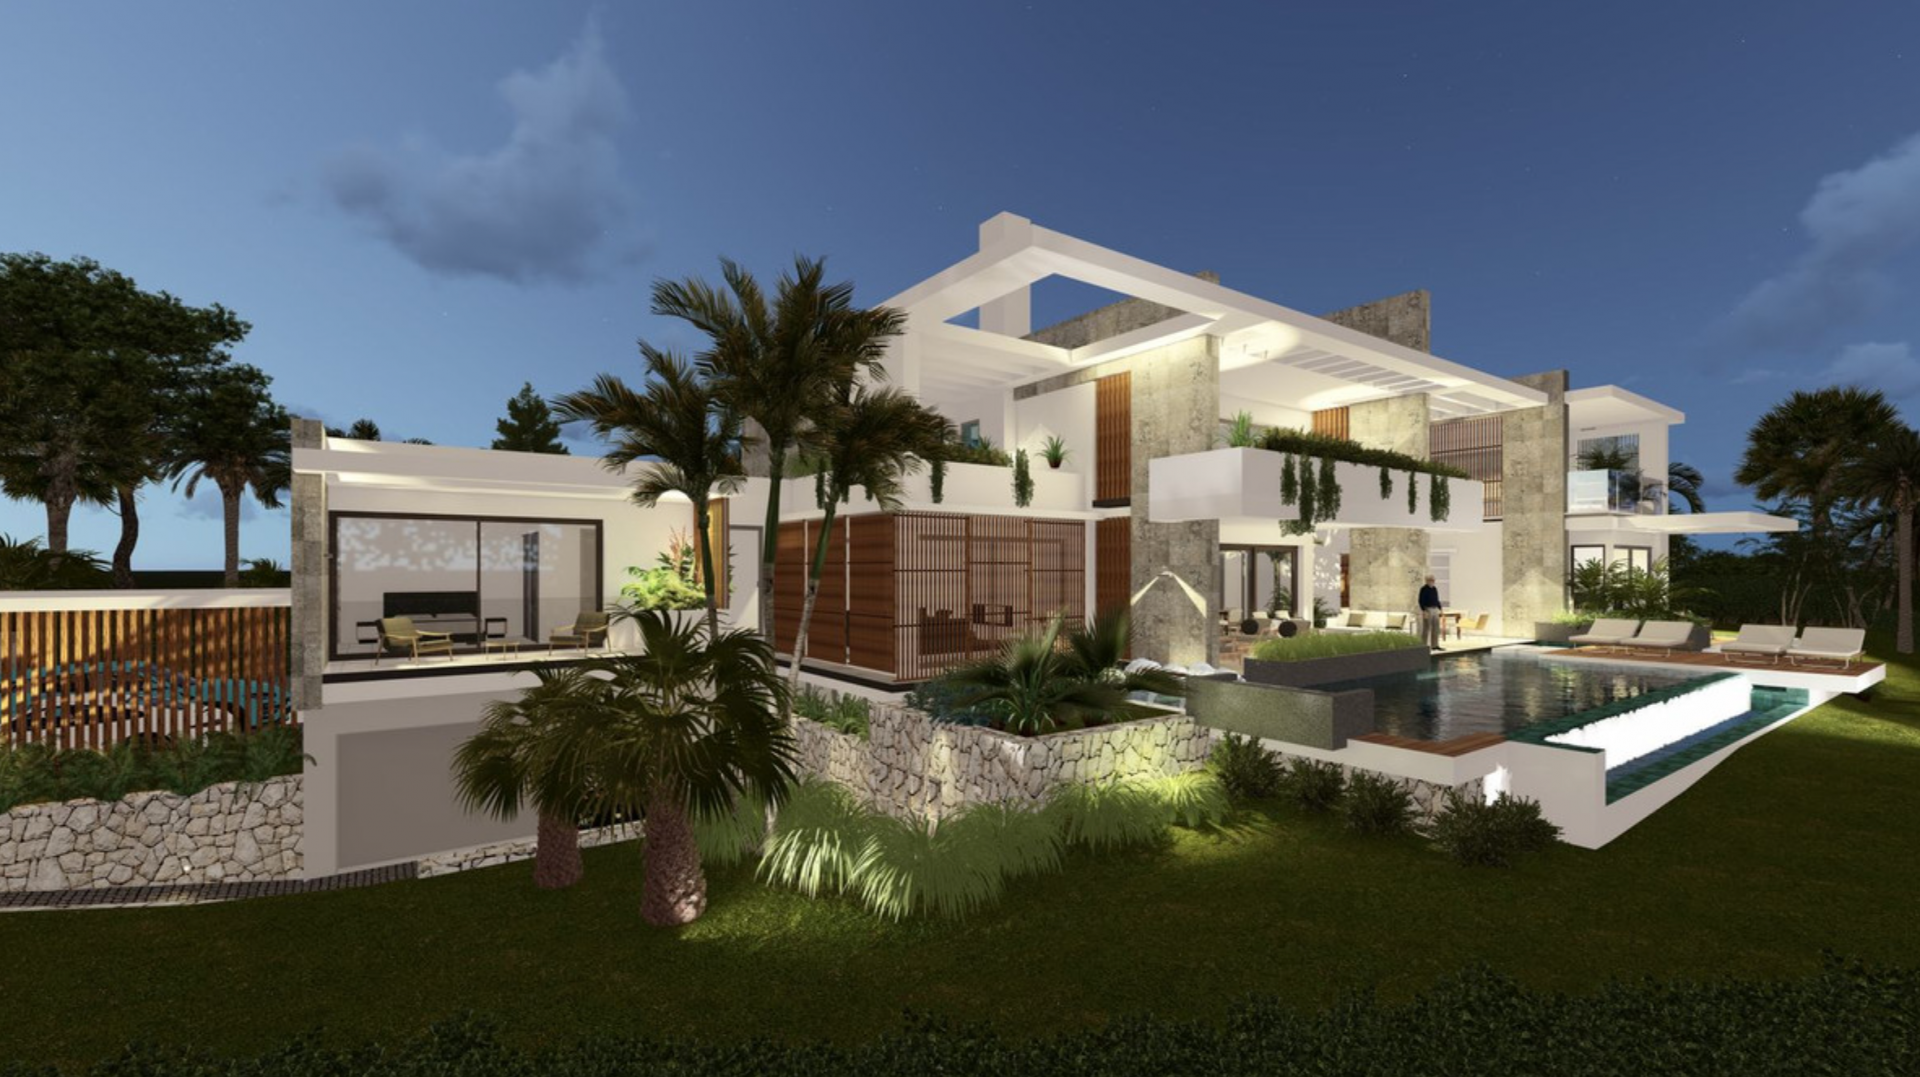 Plot in Guadalmina Baja with project & license, ready to build a luxury villa